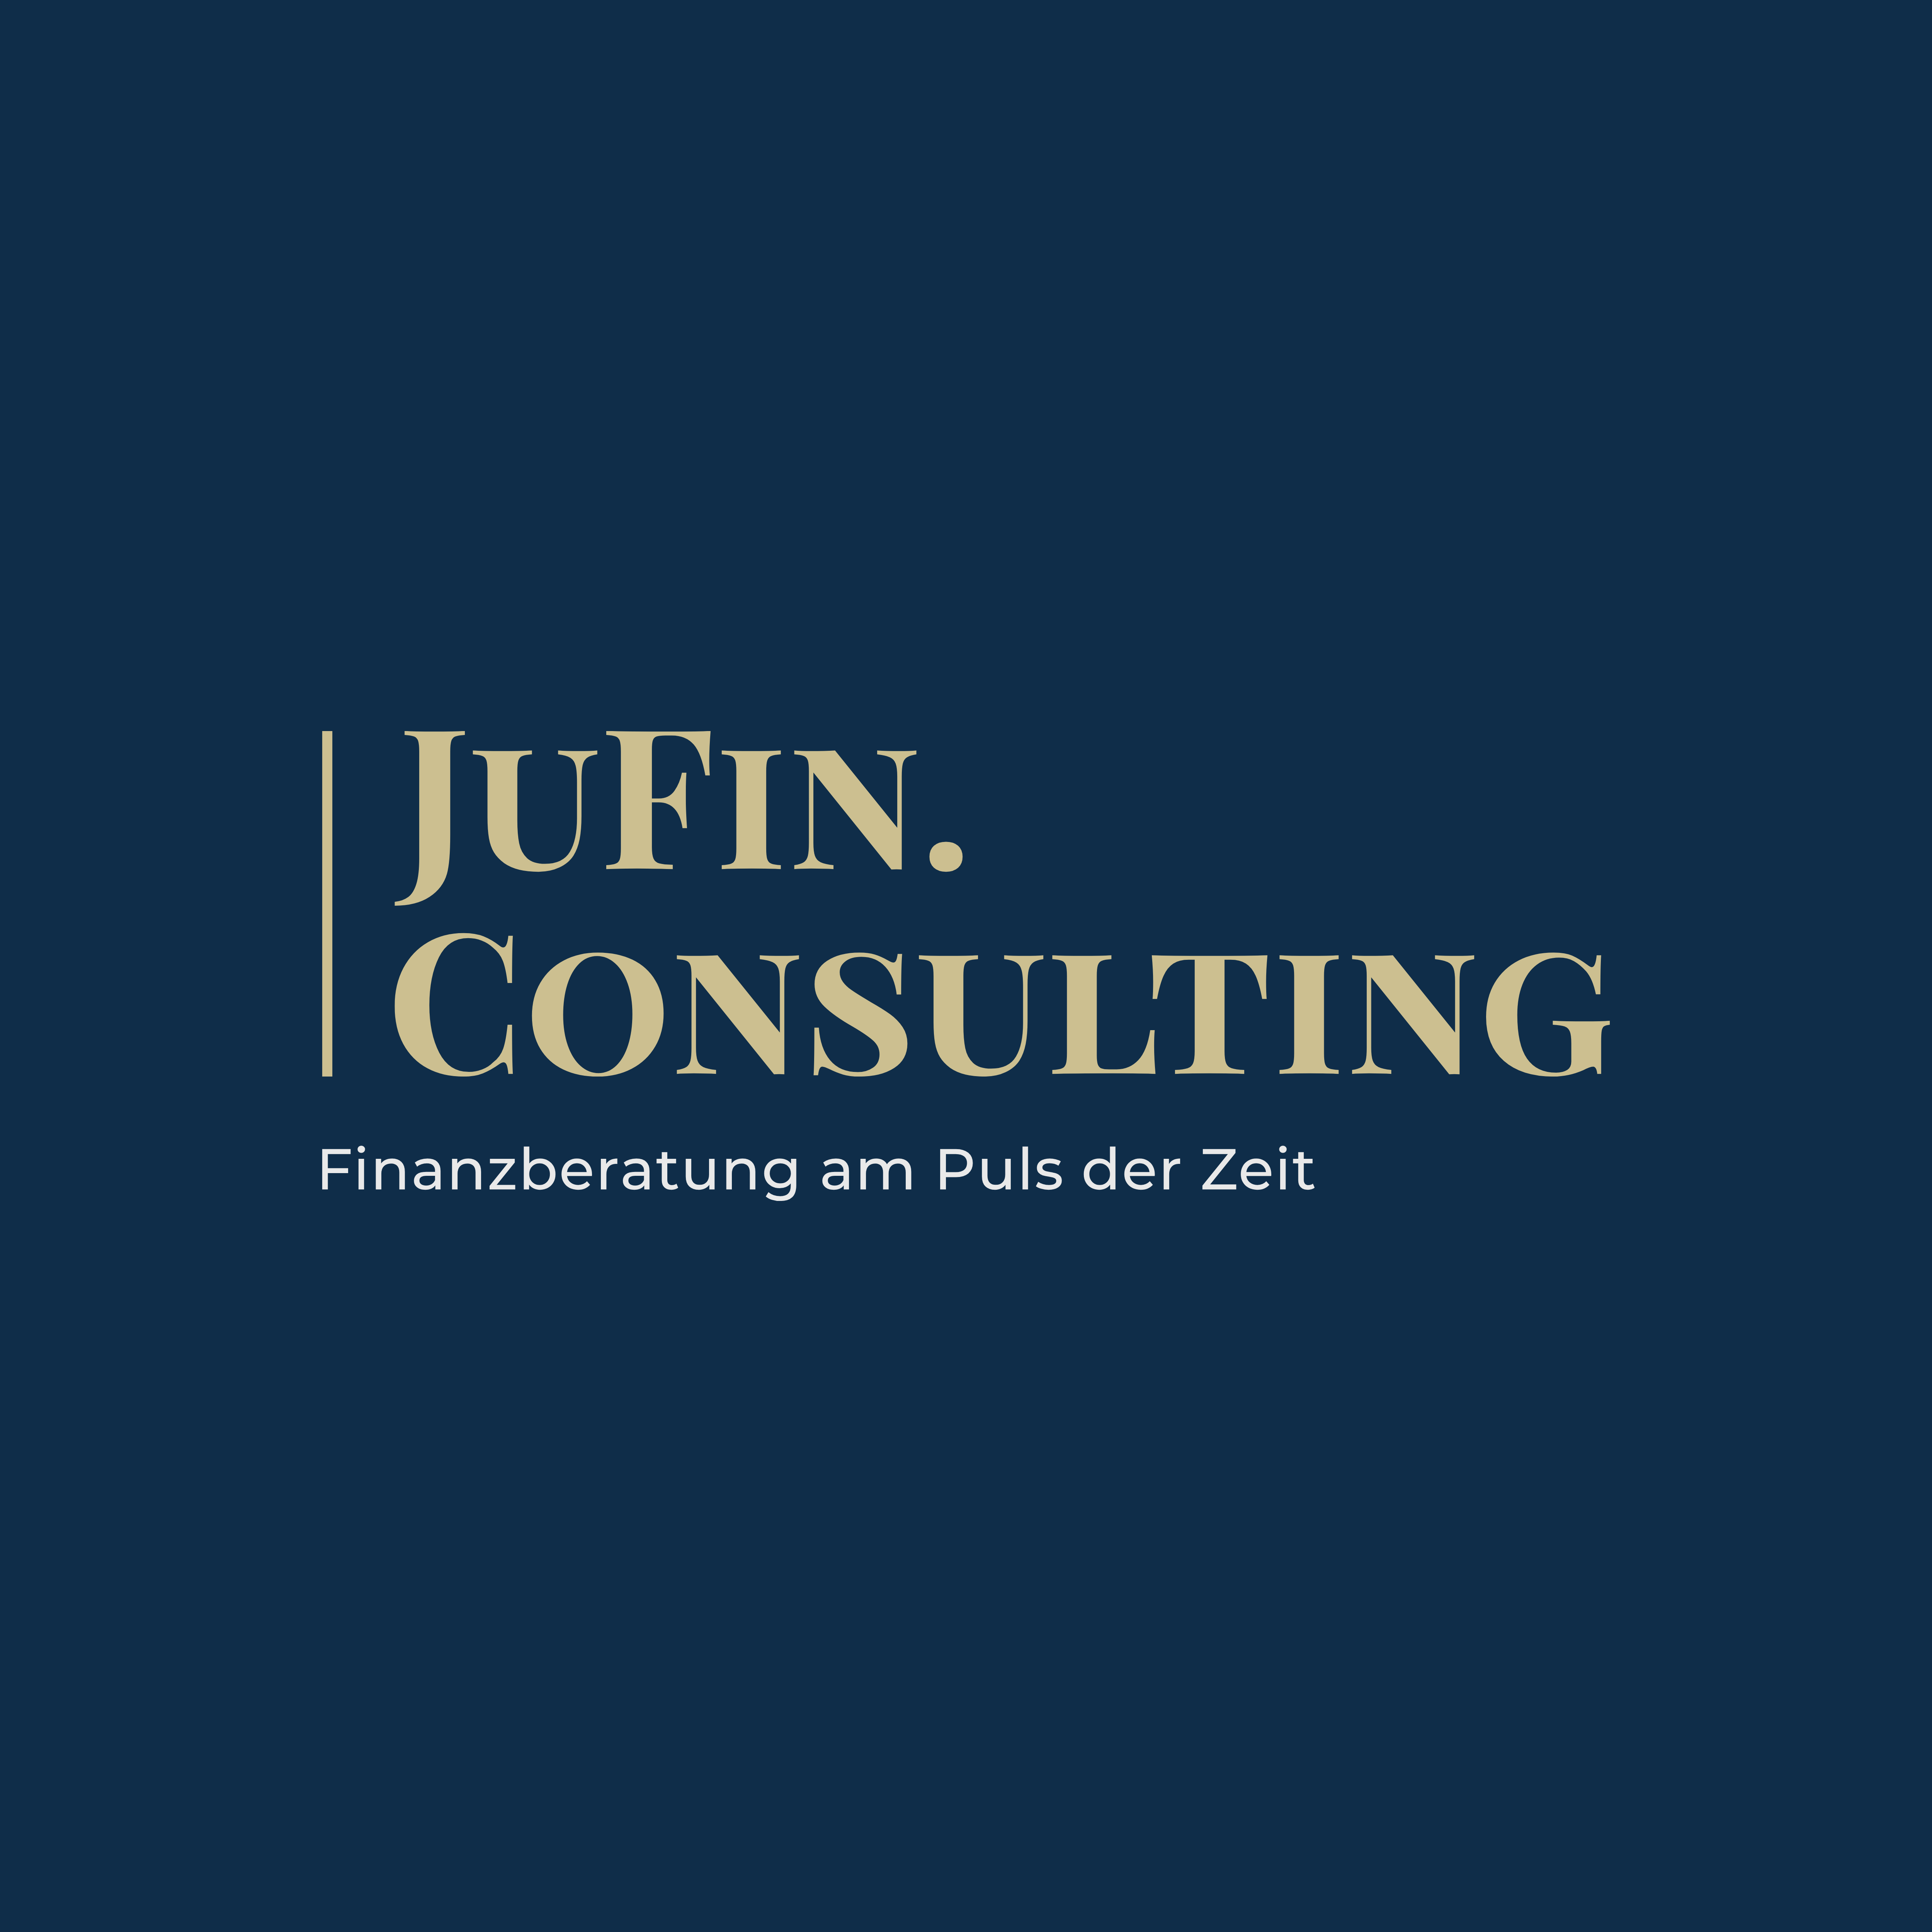 JuFin.Consulting